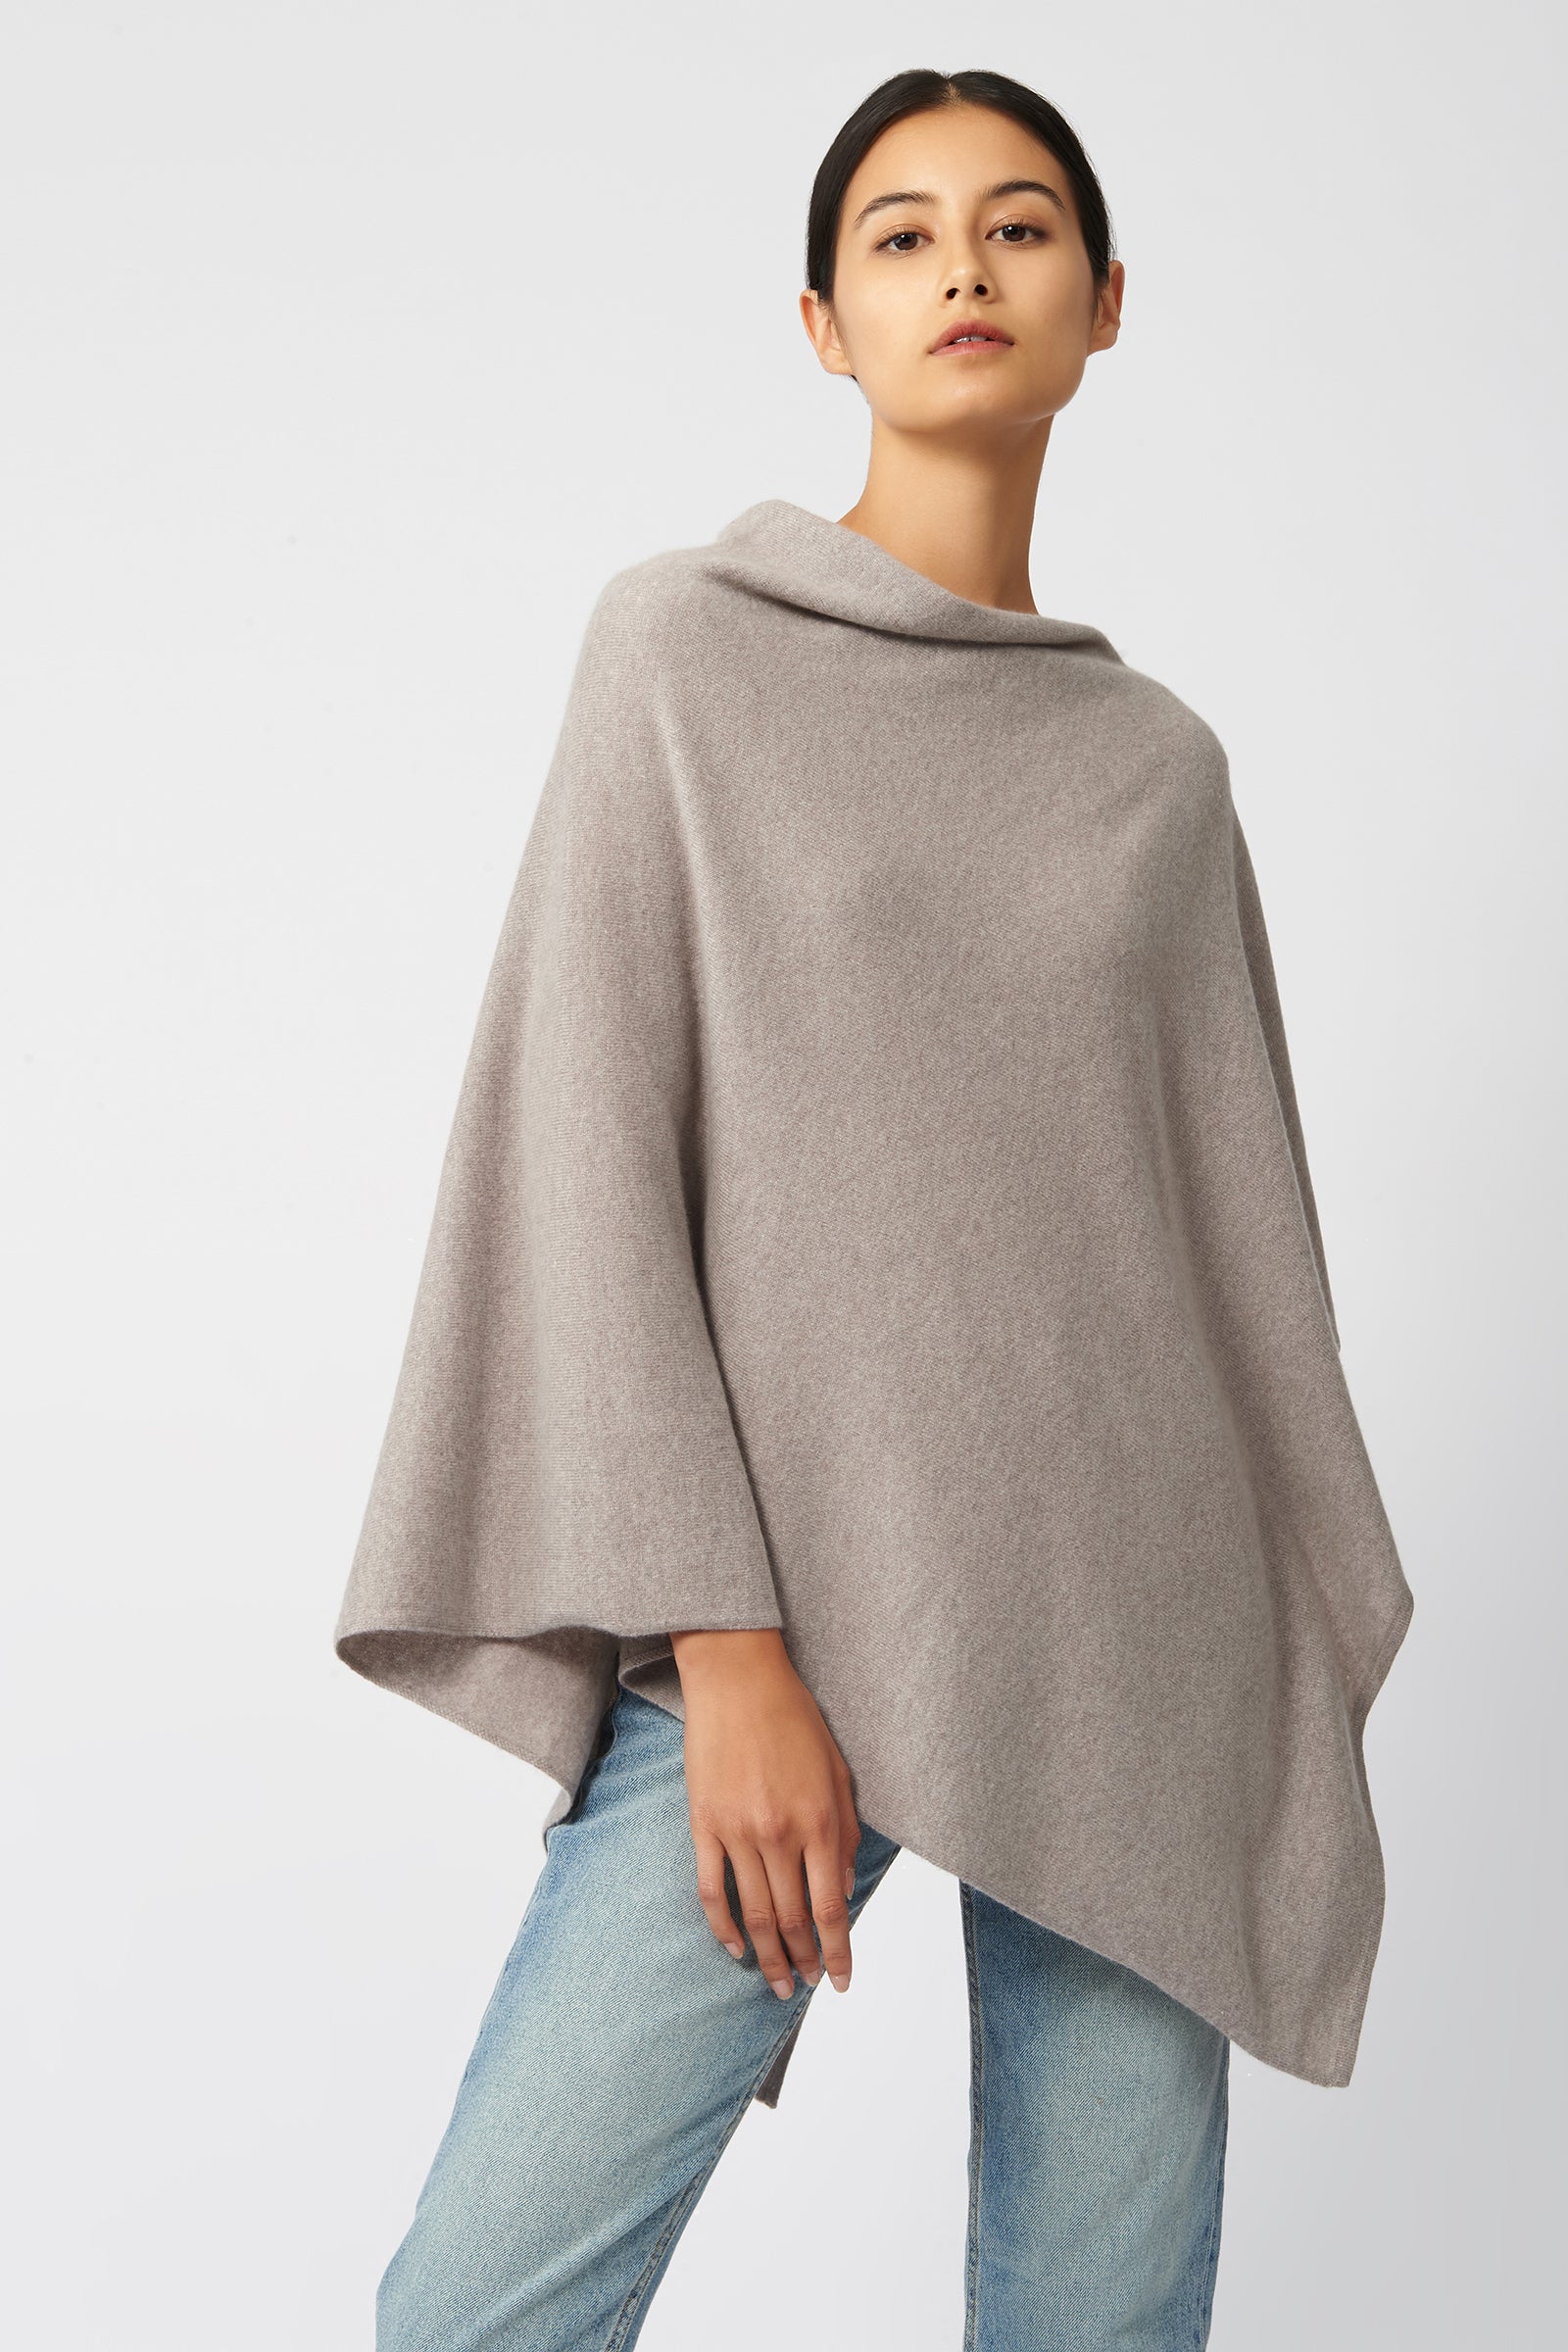 Kal Rieman Cashmere Poncho in Drift on Model Front View